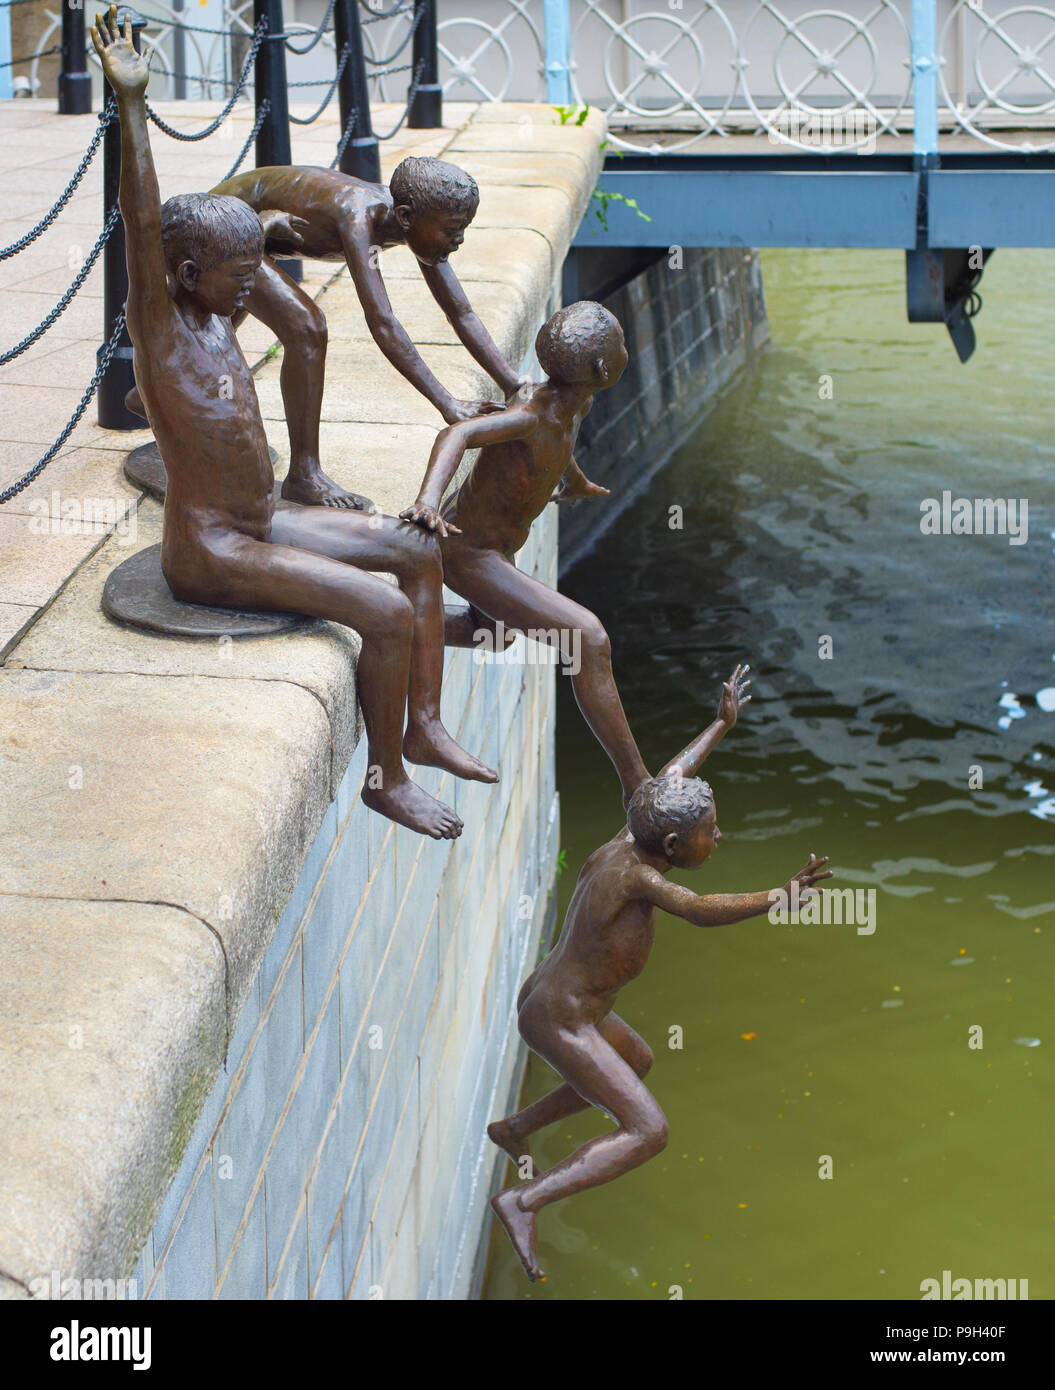 SINGAPORE - FEBRUARY 16, 2017: 'People of the River' statue by Chong Fah Cheong of children jumping into the river in Singapore Stock Photo